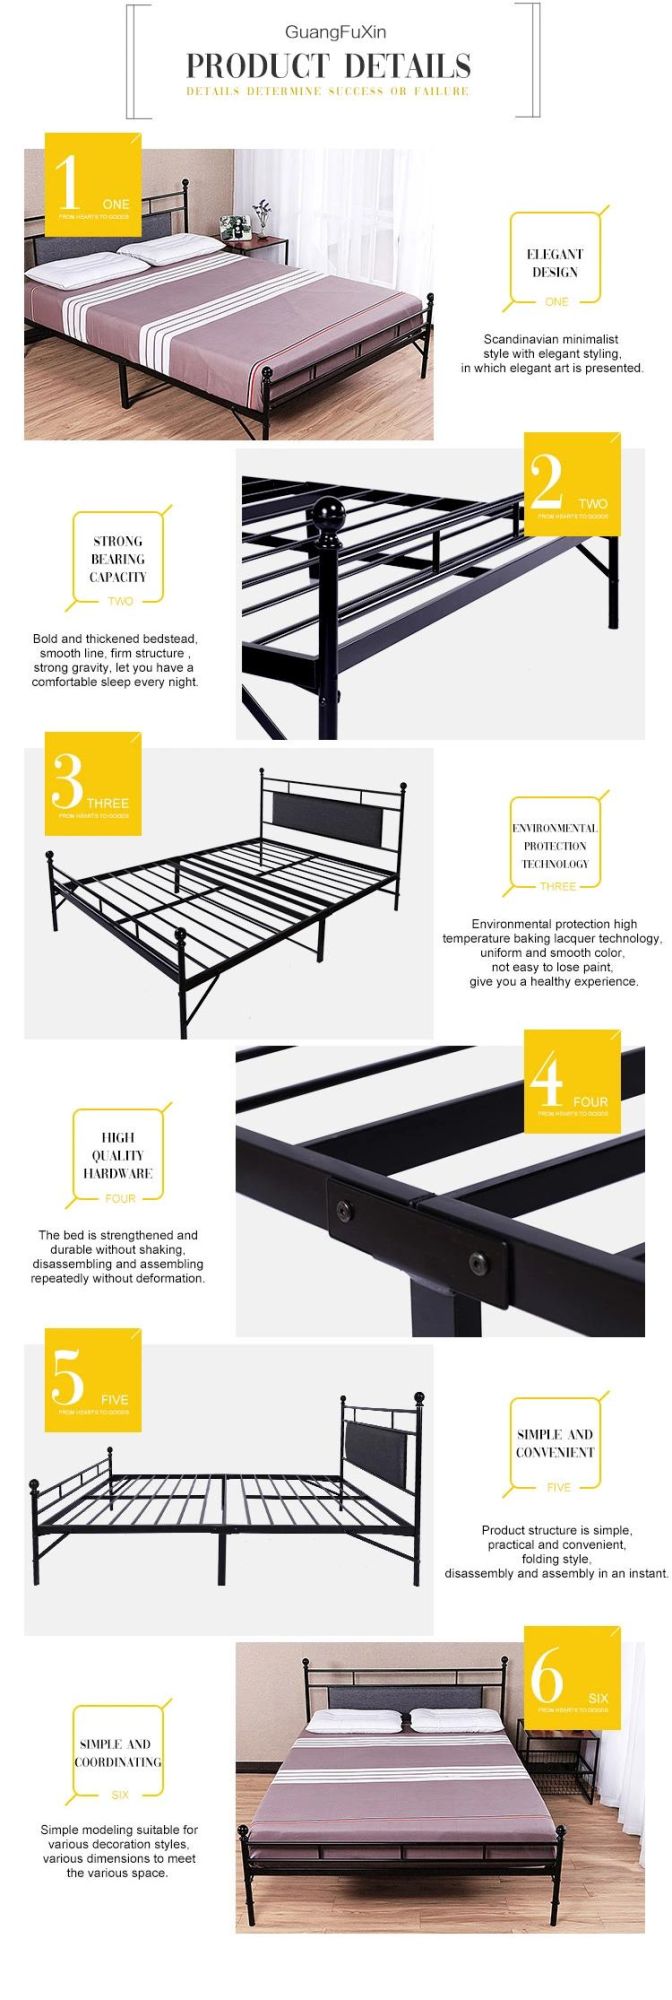 Hot Products to Sell Online Dormitory Beds Easy Folding Bed Frame